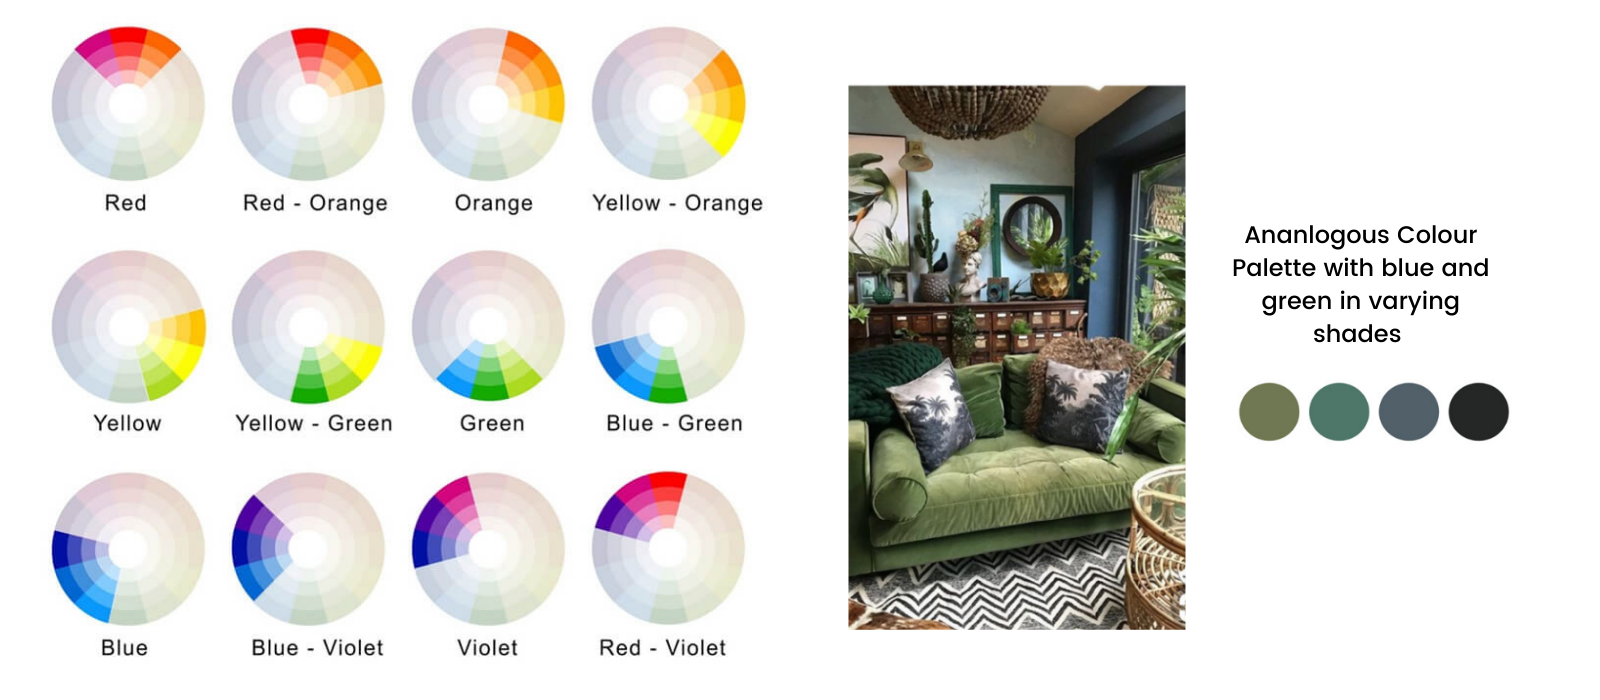 How to style your home with an Analogous Colour Scheme / Palette.